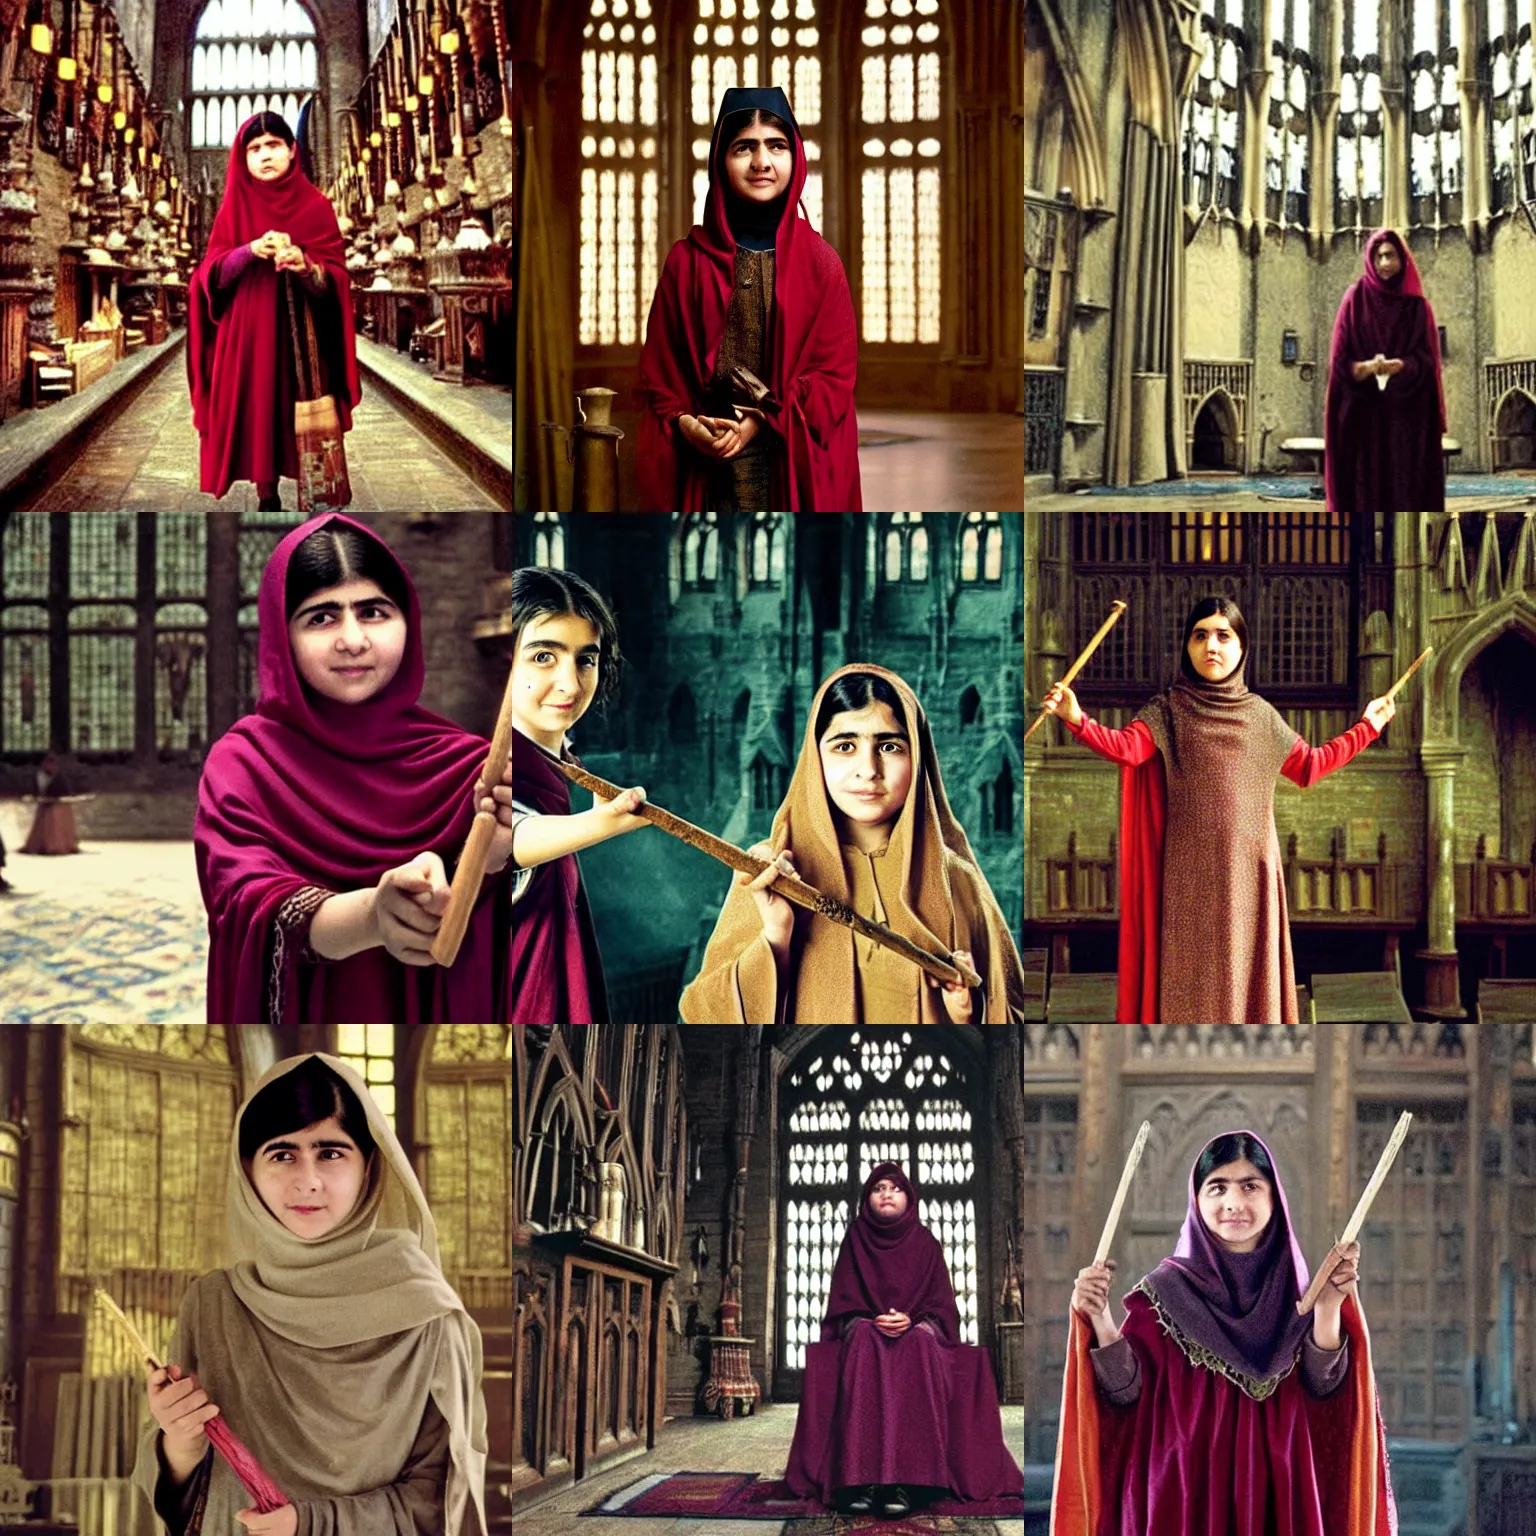 Prompt: Malala Yousafzai as a witch from Harry Potter, wearing Hogwarts robes and holding a wand, in the Hogwarts great hall, film still from Harry Potter